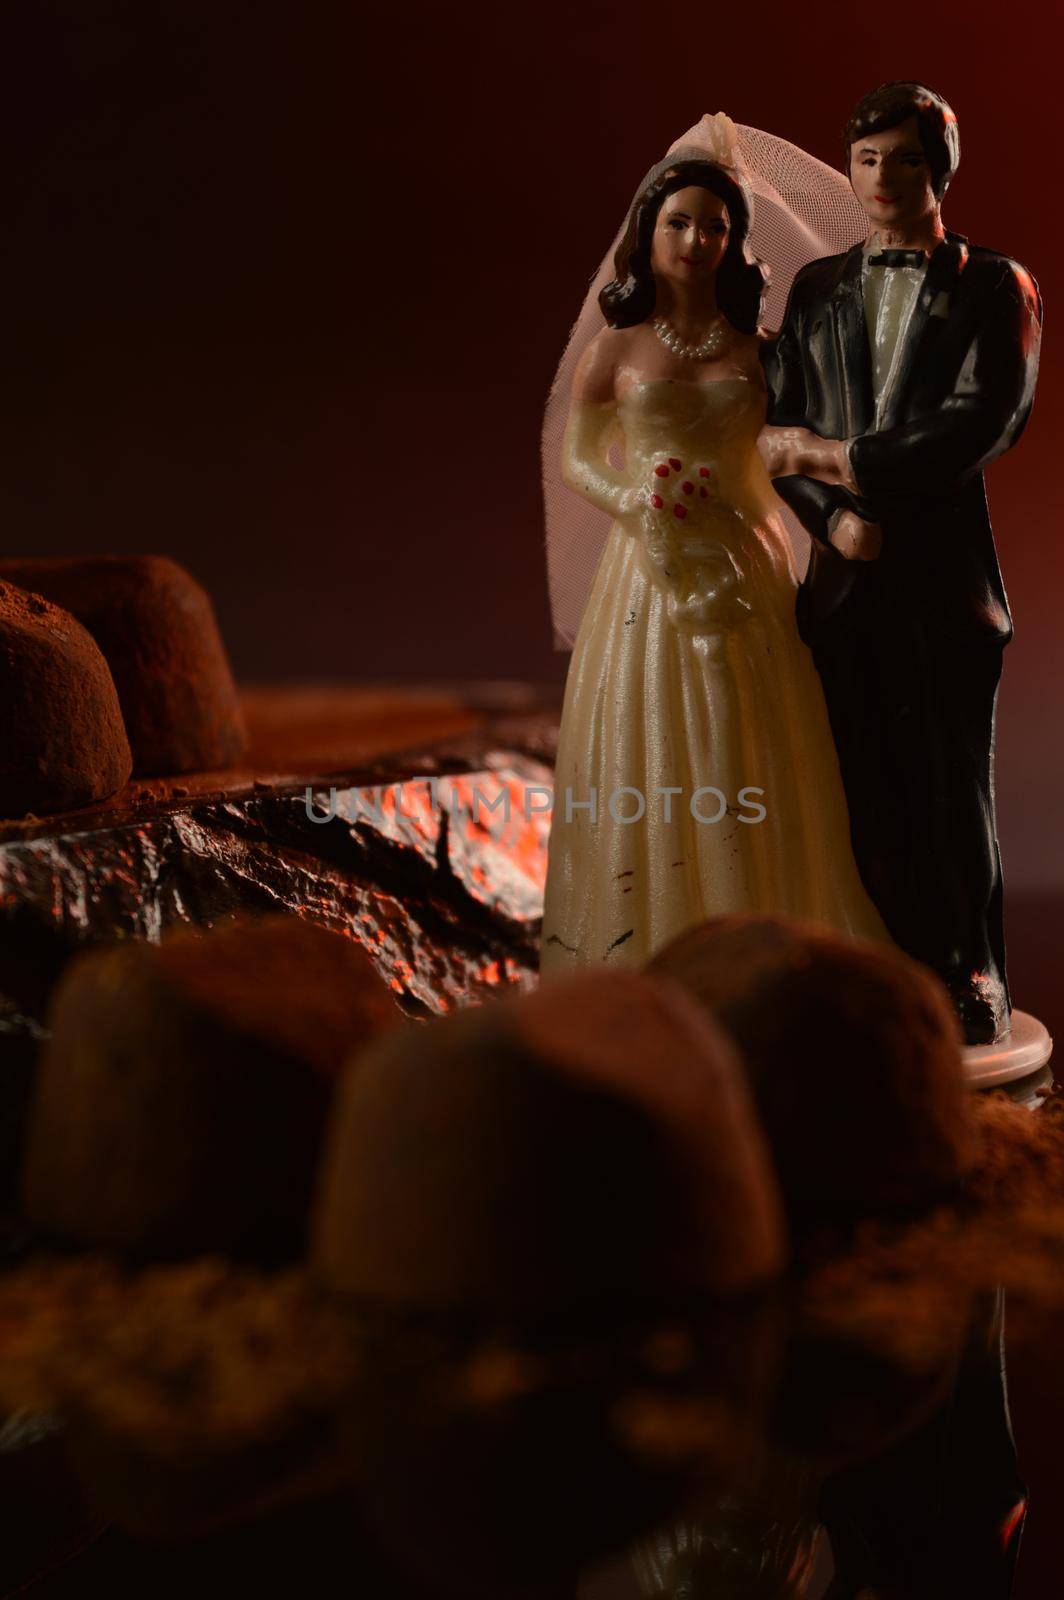 A married couple in a scene of fine chocolate truffles.